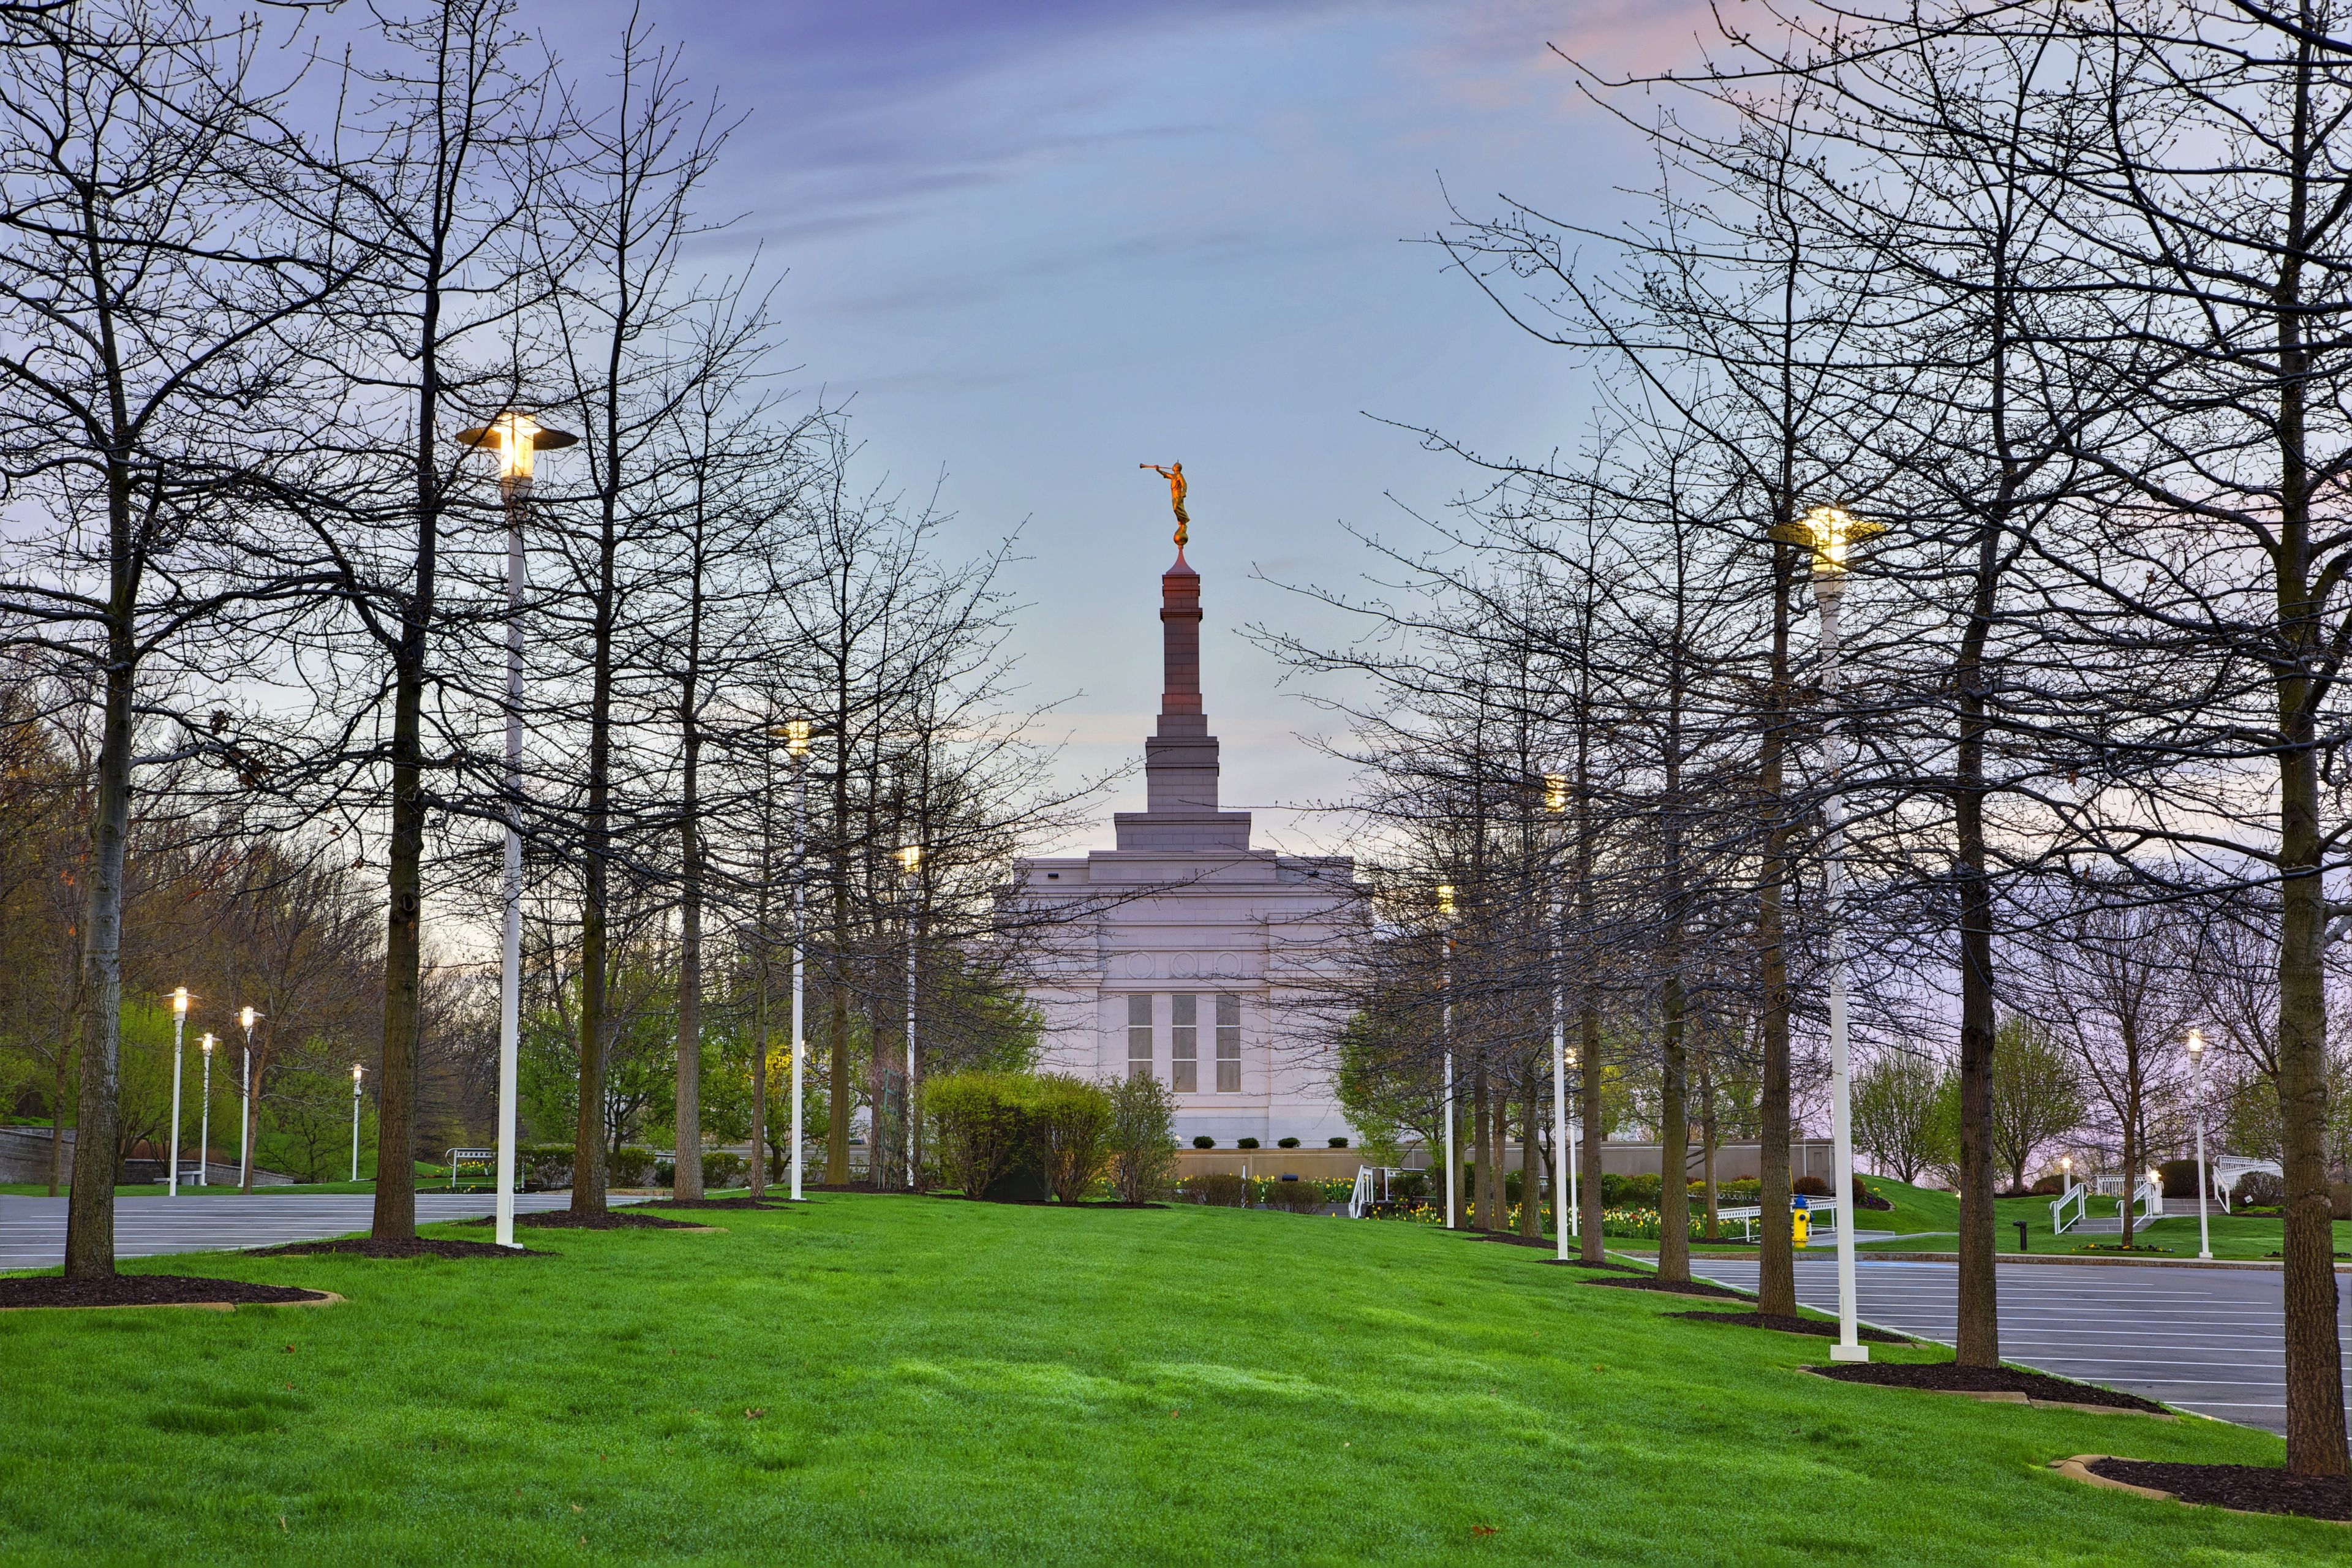 The Palmyra New York Temple, including the scenery and spire.